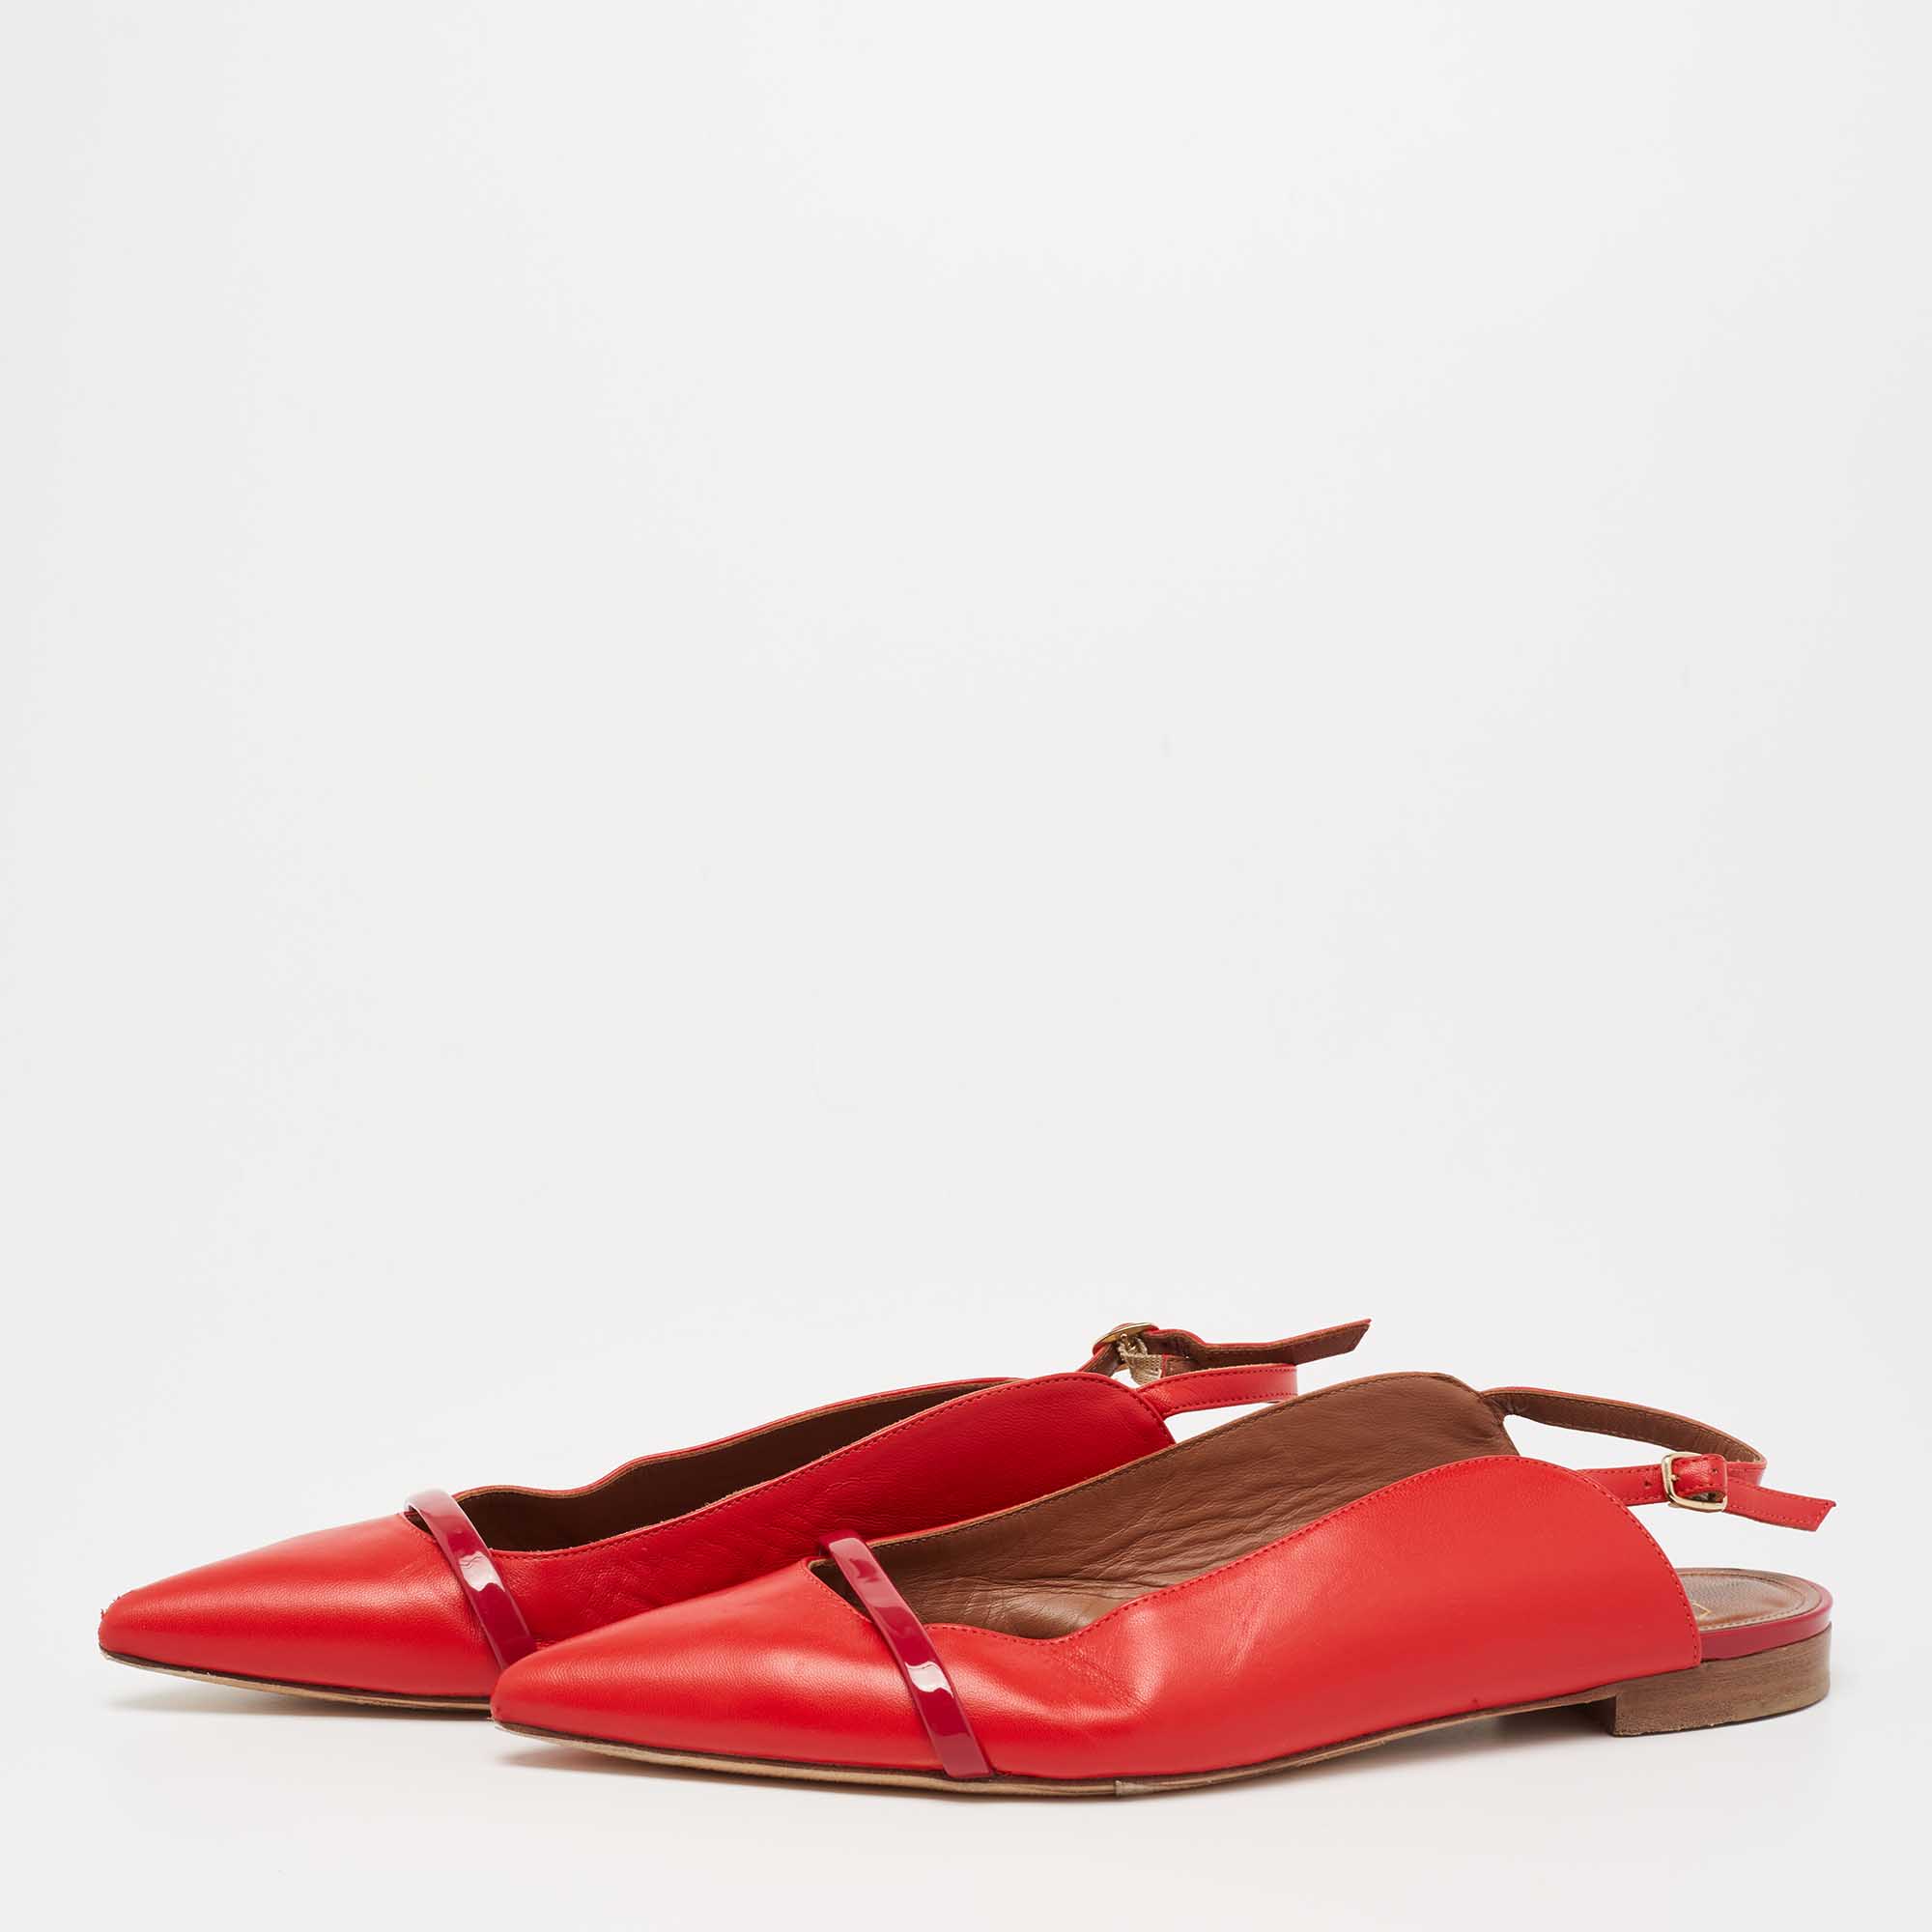 

Malone Souliers x Roy Luwolt Red Leather Marion Luwolt Flat Slingback Sandals Size